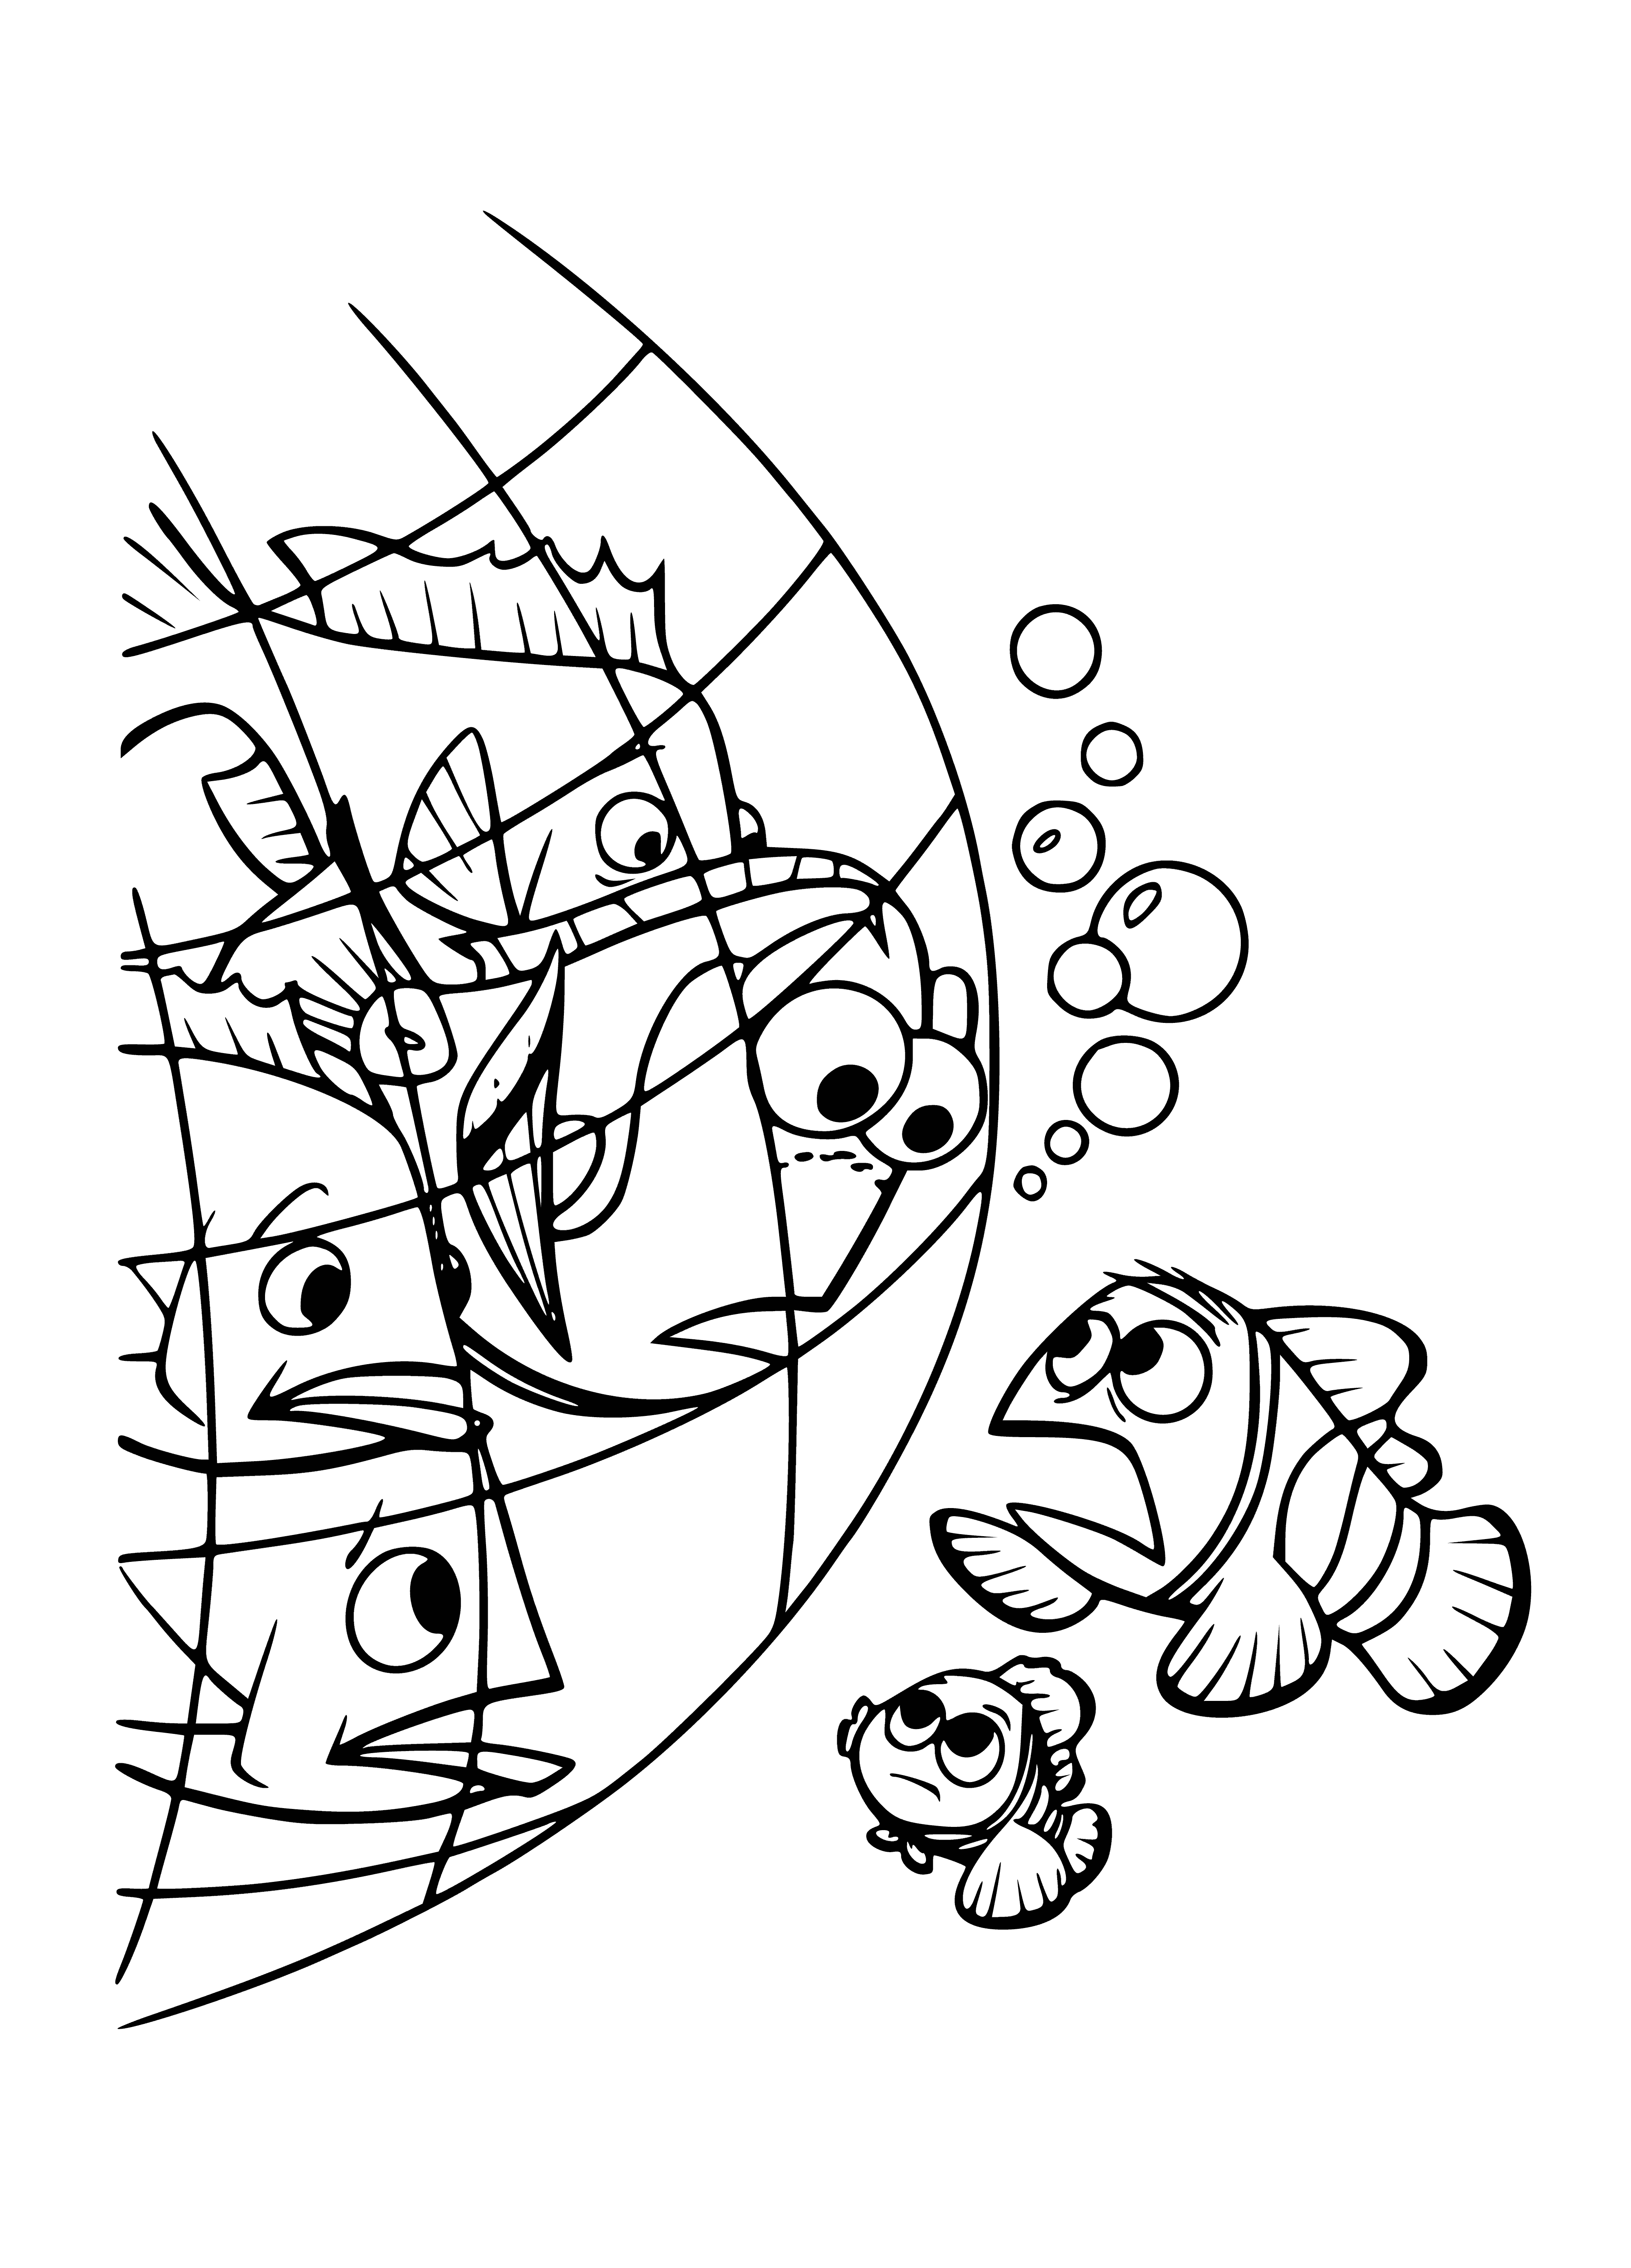 coloring page: Marlin & Dory go on a journey across the ocean to find Nemo, who was captured by a diver & taken to a dentist's office. Along the way they meet Bruce, Nigel, Crush, Squirt & their namesake, who helps them get home. #Don'tDoDrugs #DependOnFriends